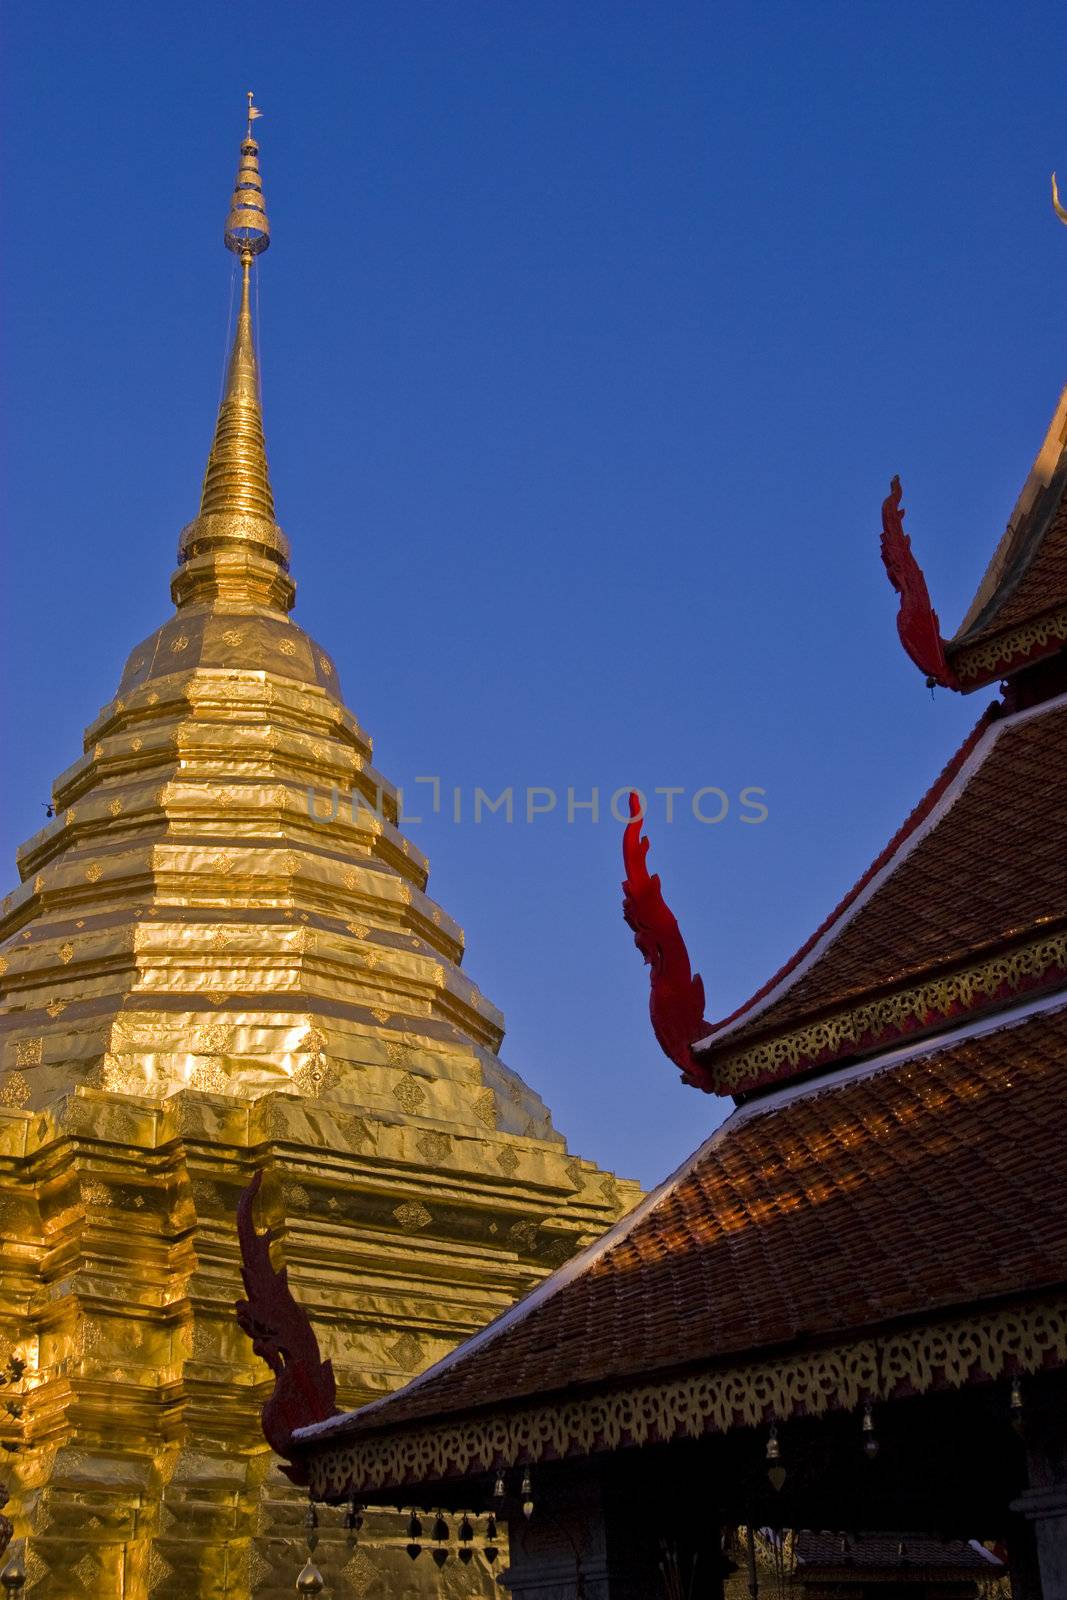 Roofs and goldel building in Wat po temple, thailand